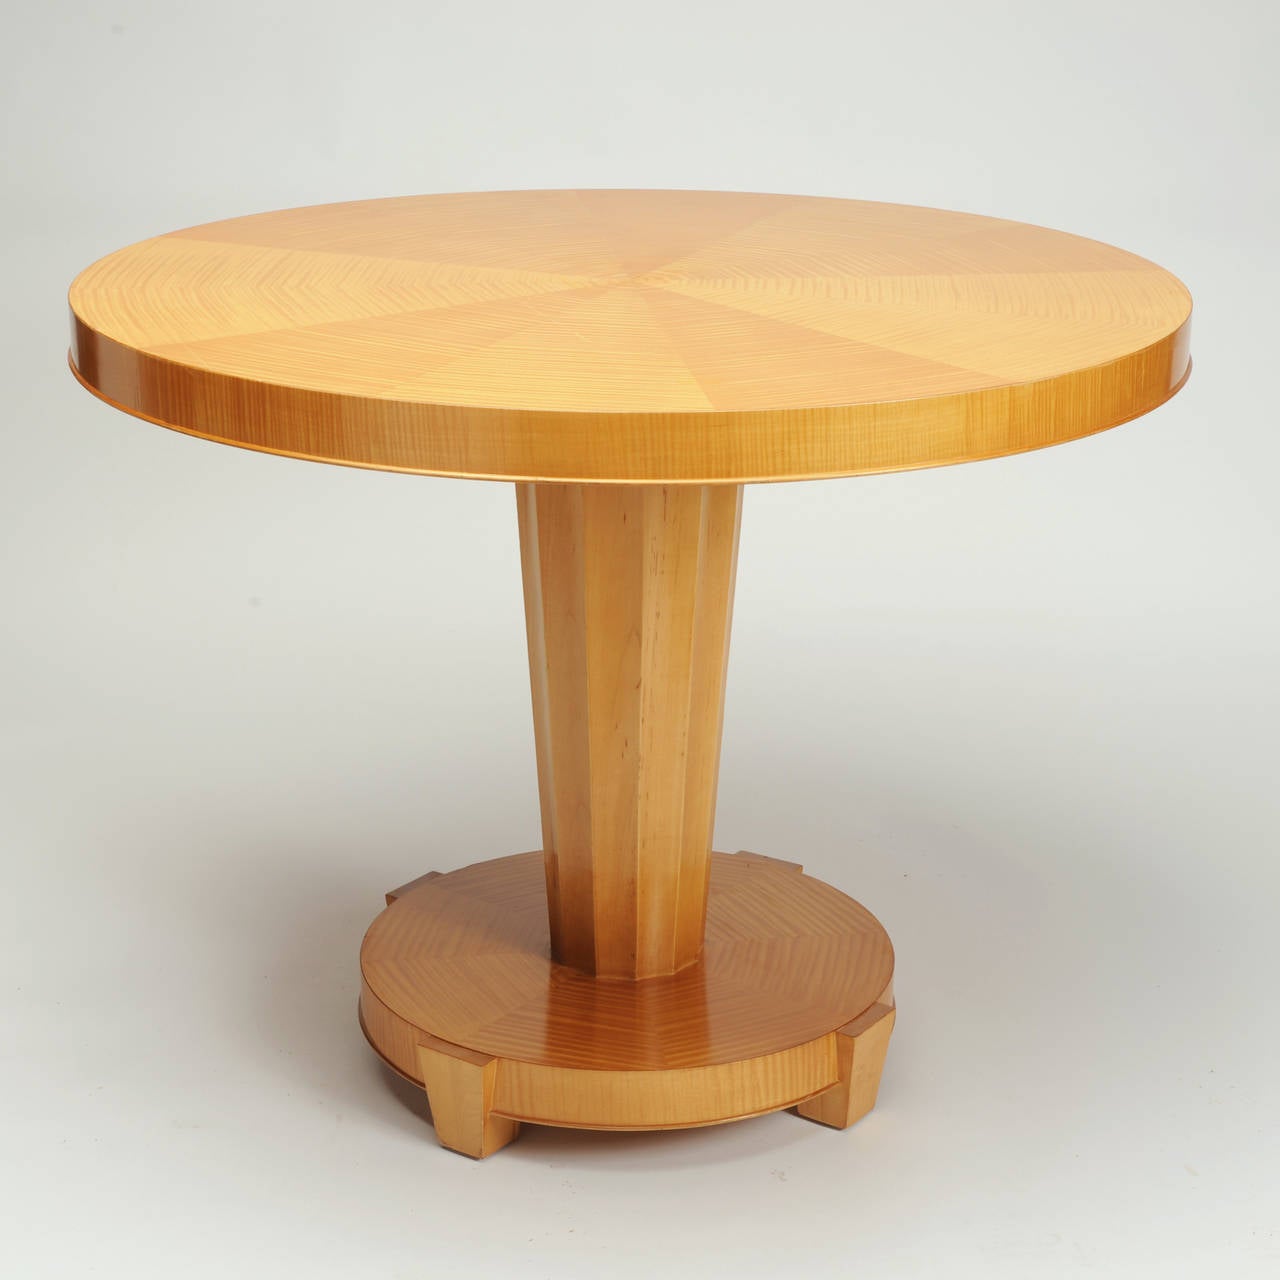 North American Round Tiger Maple Center or Club Table by Baker